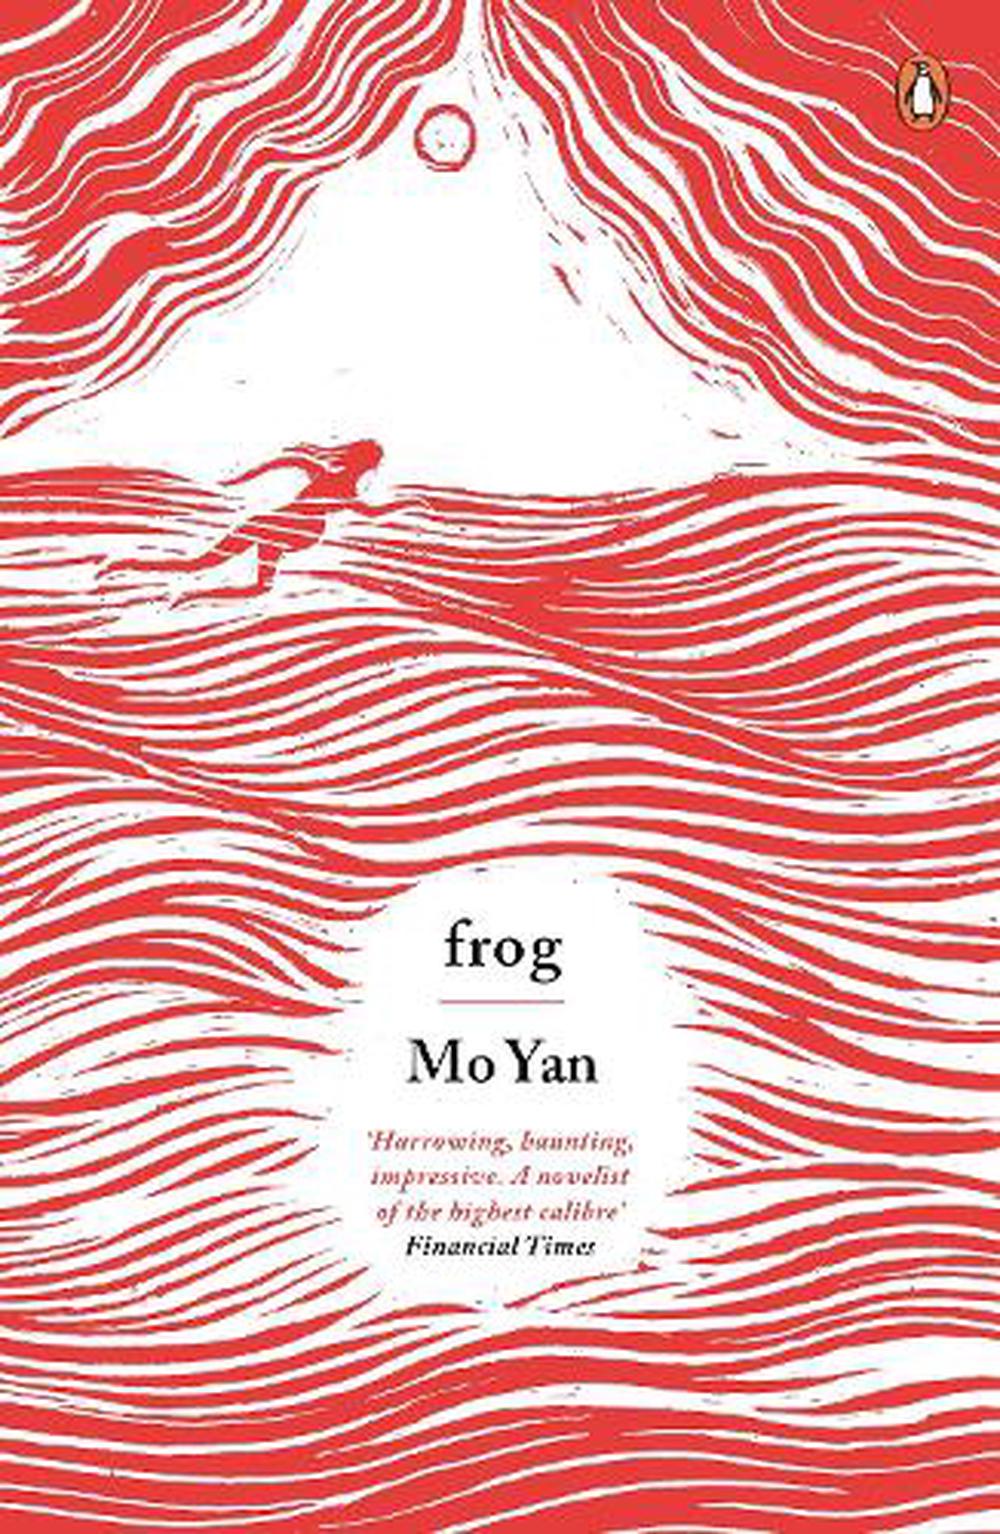 Paperback,　The　Mo　Frog　Yan,　Buy　at　by　Nile　9780241967324　online